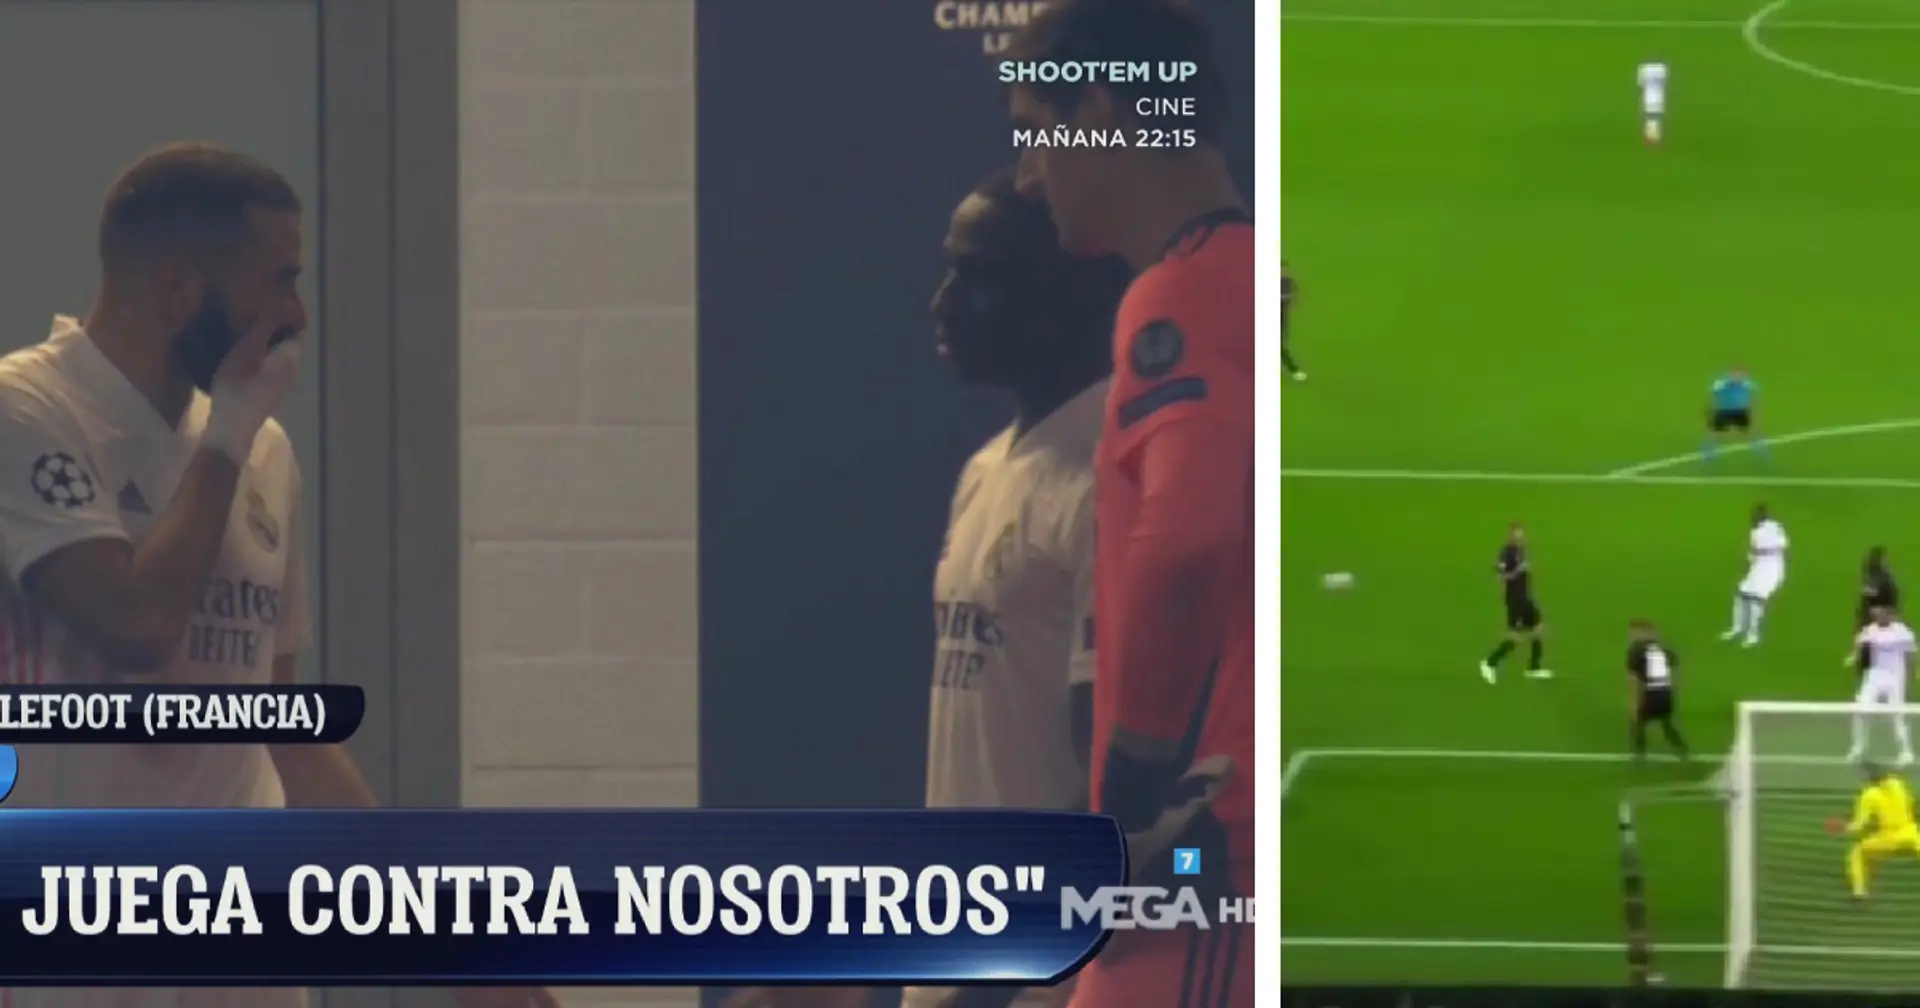 Mendy-Benzema chat on Vinicius' finishing best described in 1 key episode